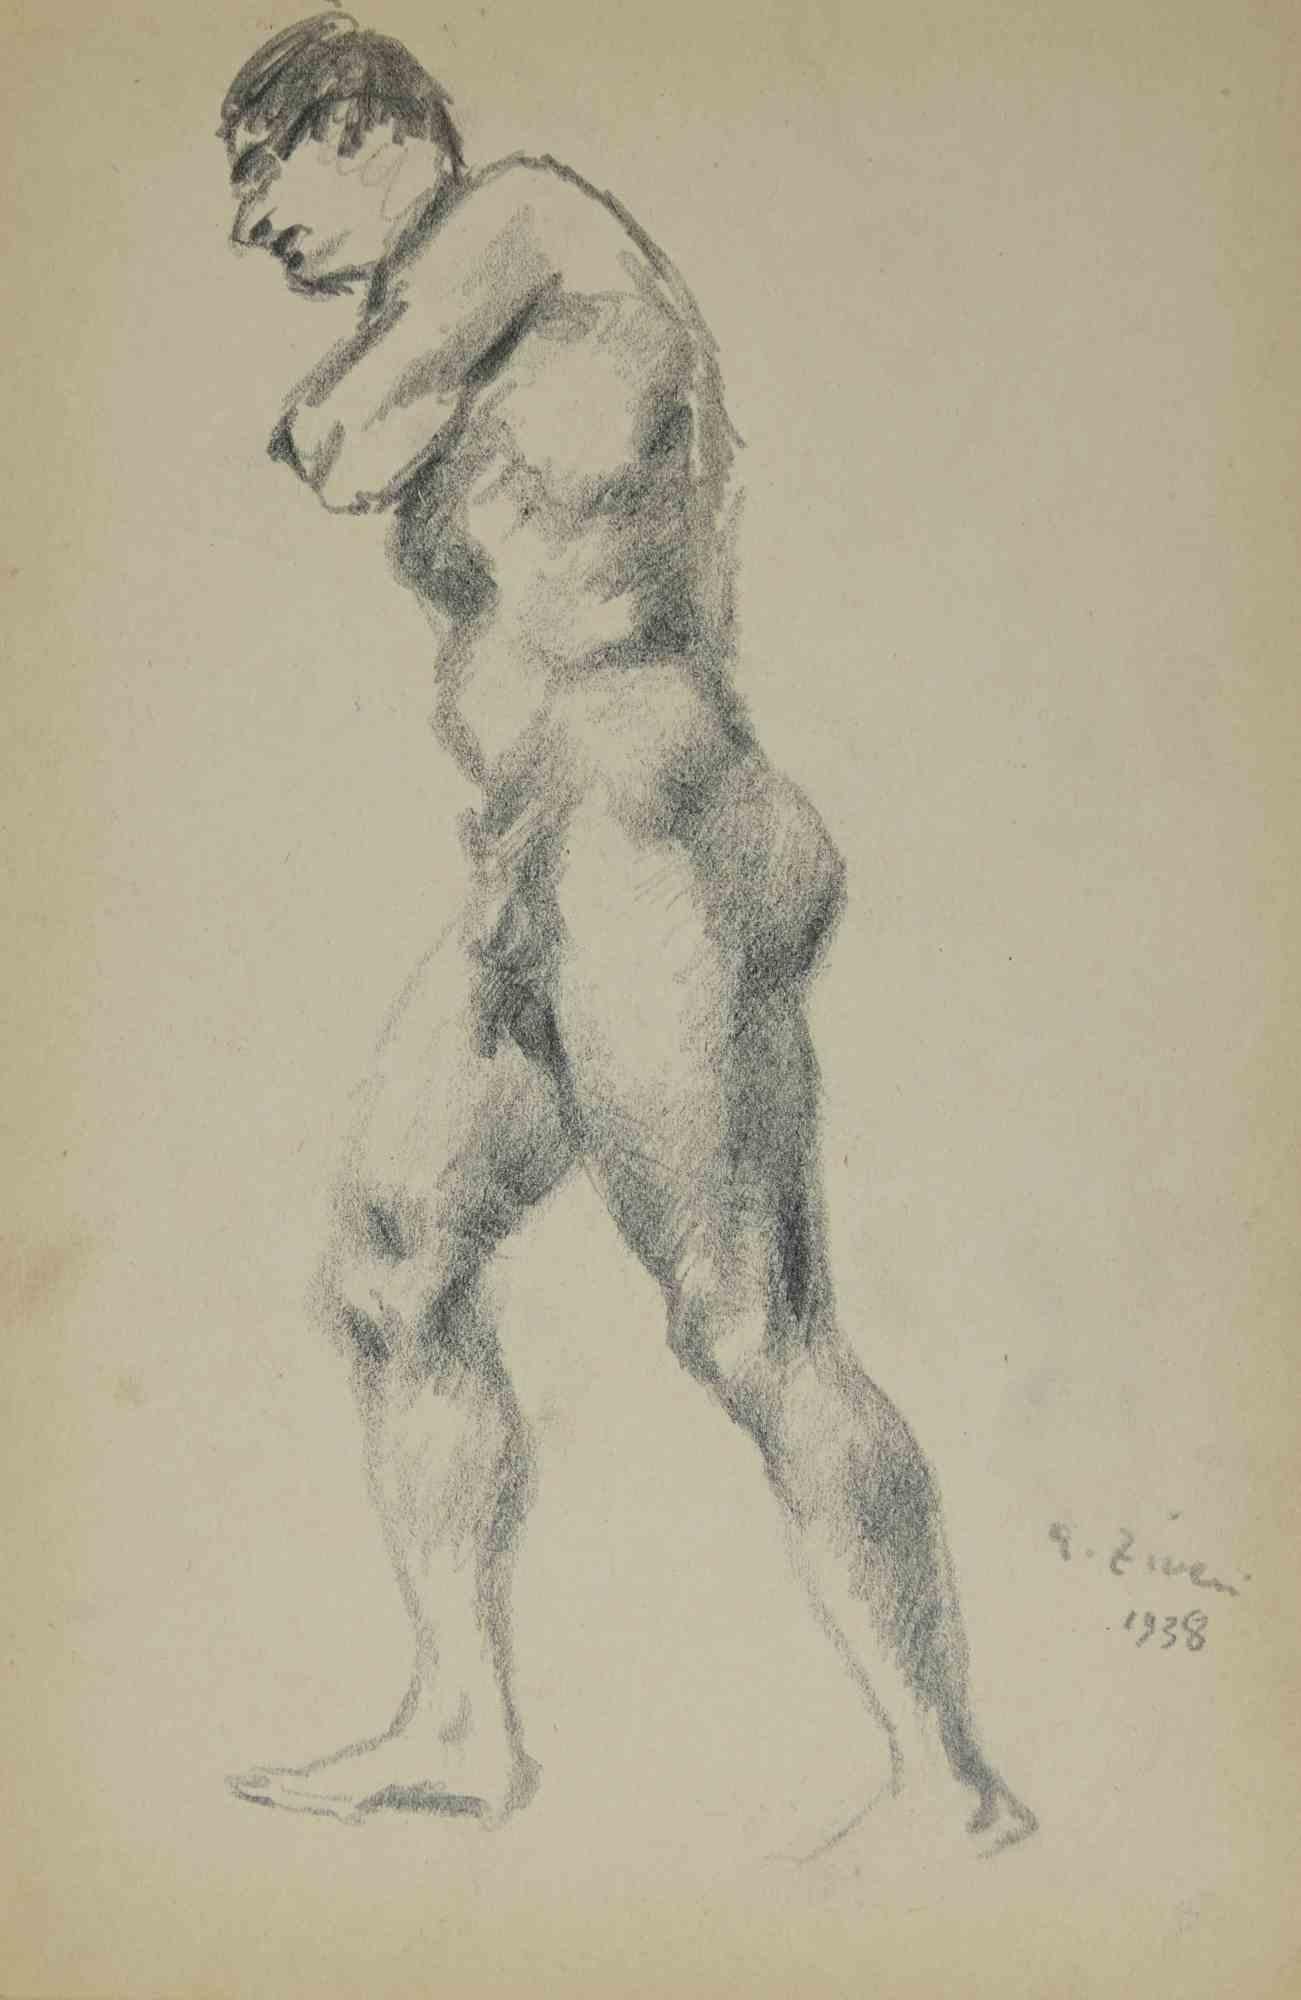 Nude is a drawing realized by Alberto Ziveri in 1938.

Charcoal on paper.

Hand-signed and dated.

In good conditions with slight foxing.

The artwork is represented through deft strokes masterly.

Alberto Ziveri (Rome,1908 – 1990), the Italian